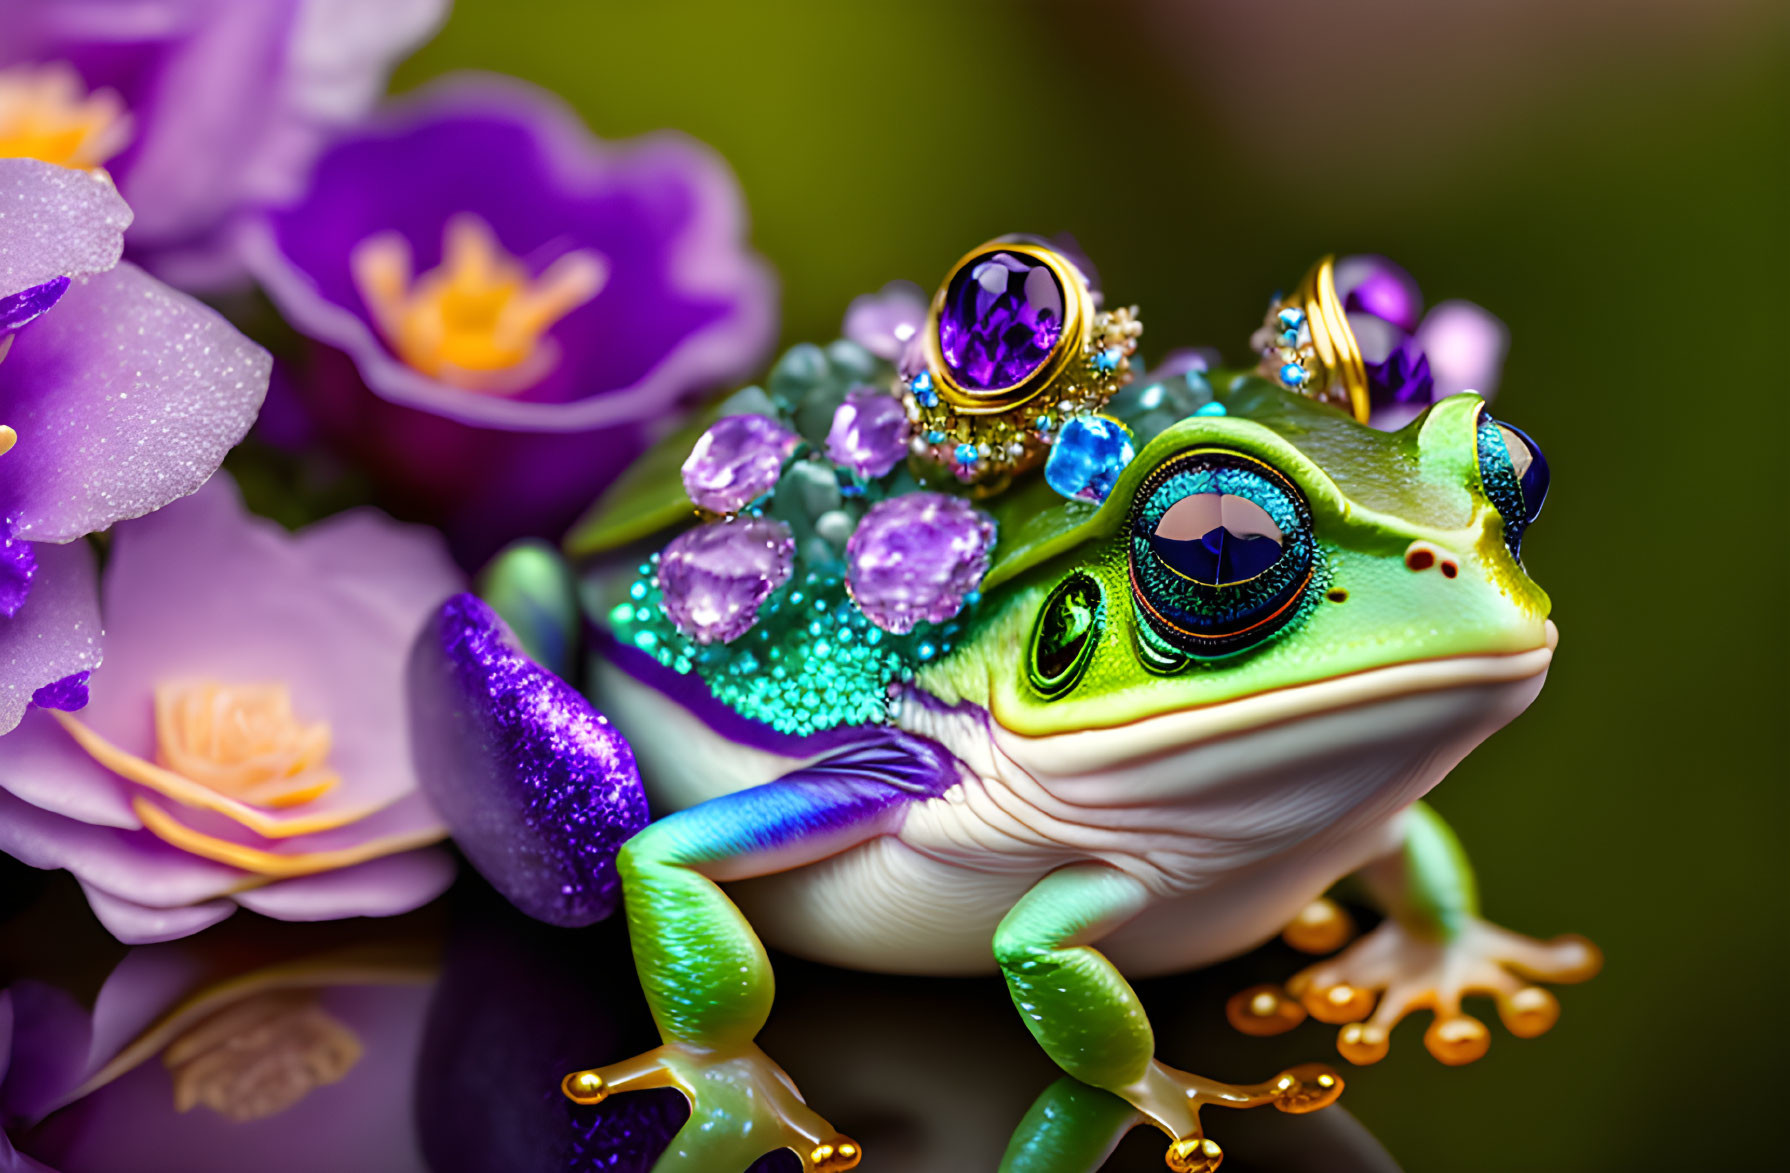 Colorful frog with gemstones and crown among purple flowers on reflective surface